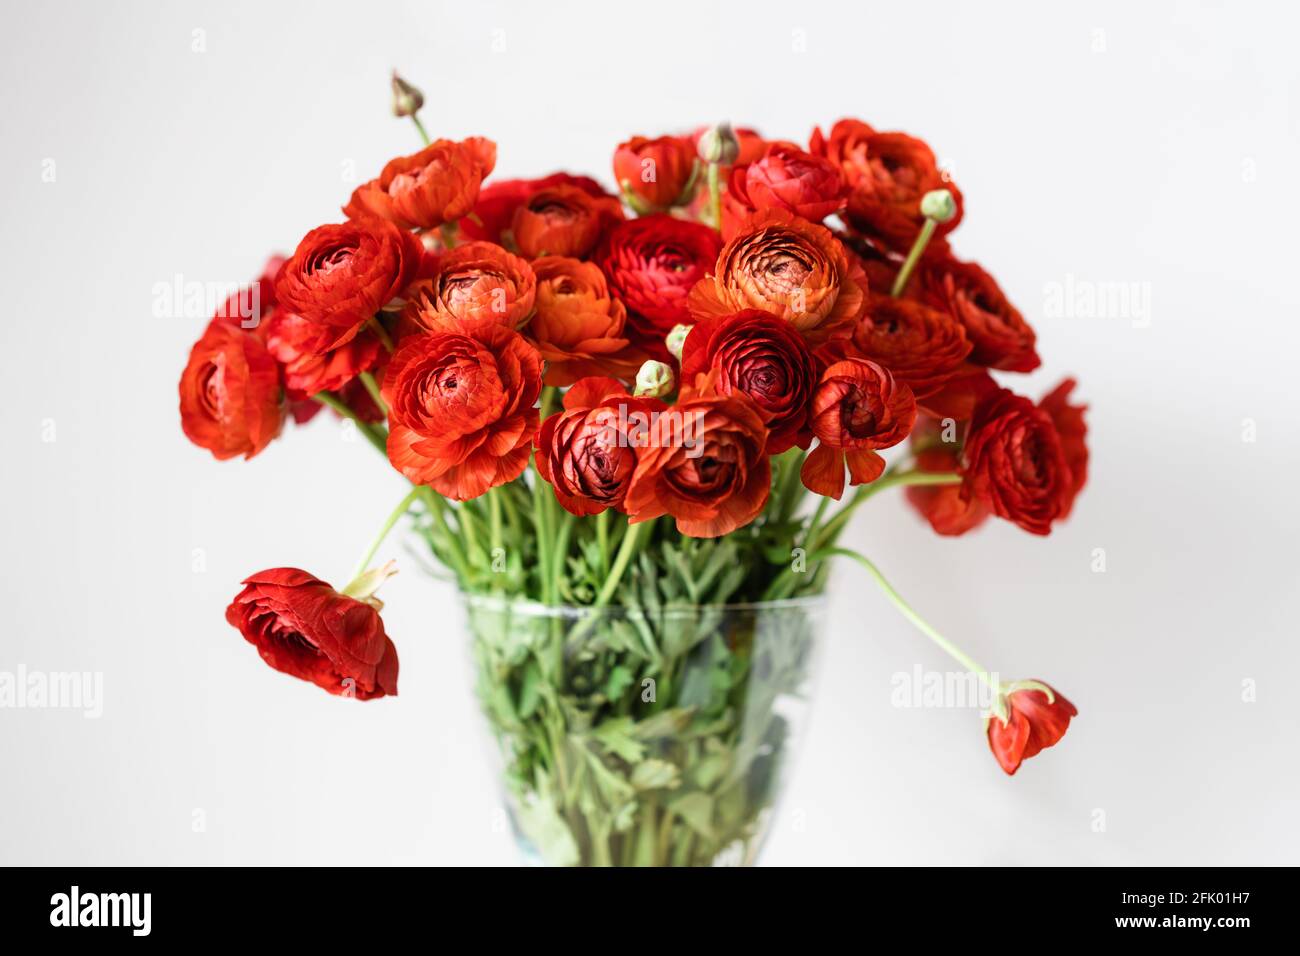 Front view of red persian buttercups in a glass vase on white background. Ranunculus asiaticus. Stock Photo